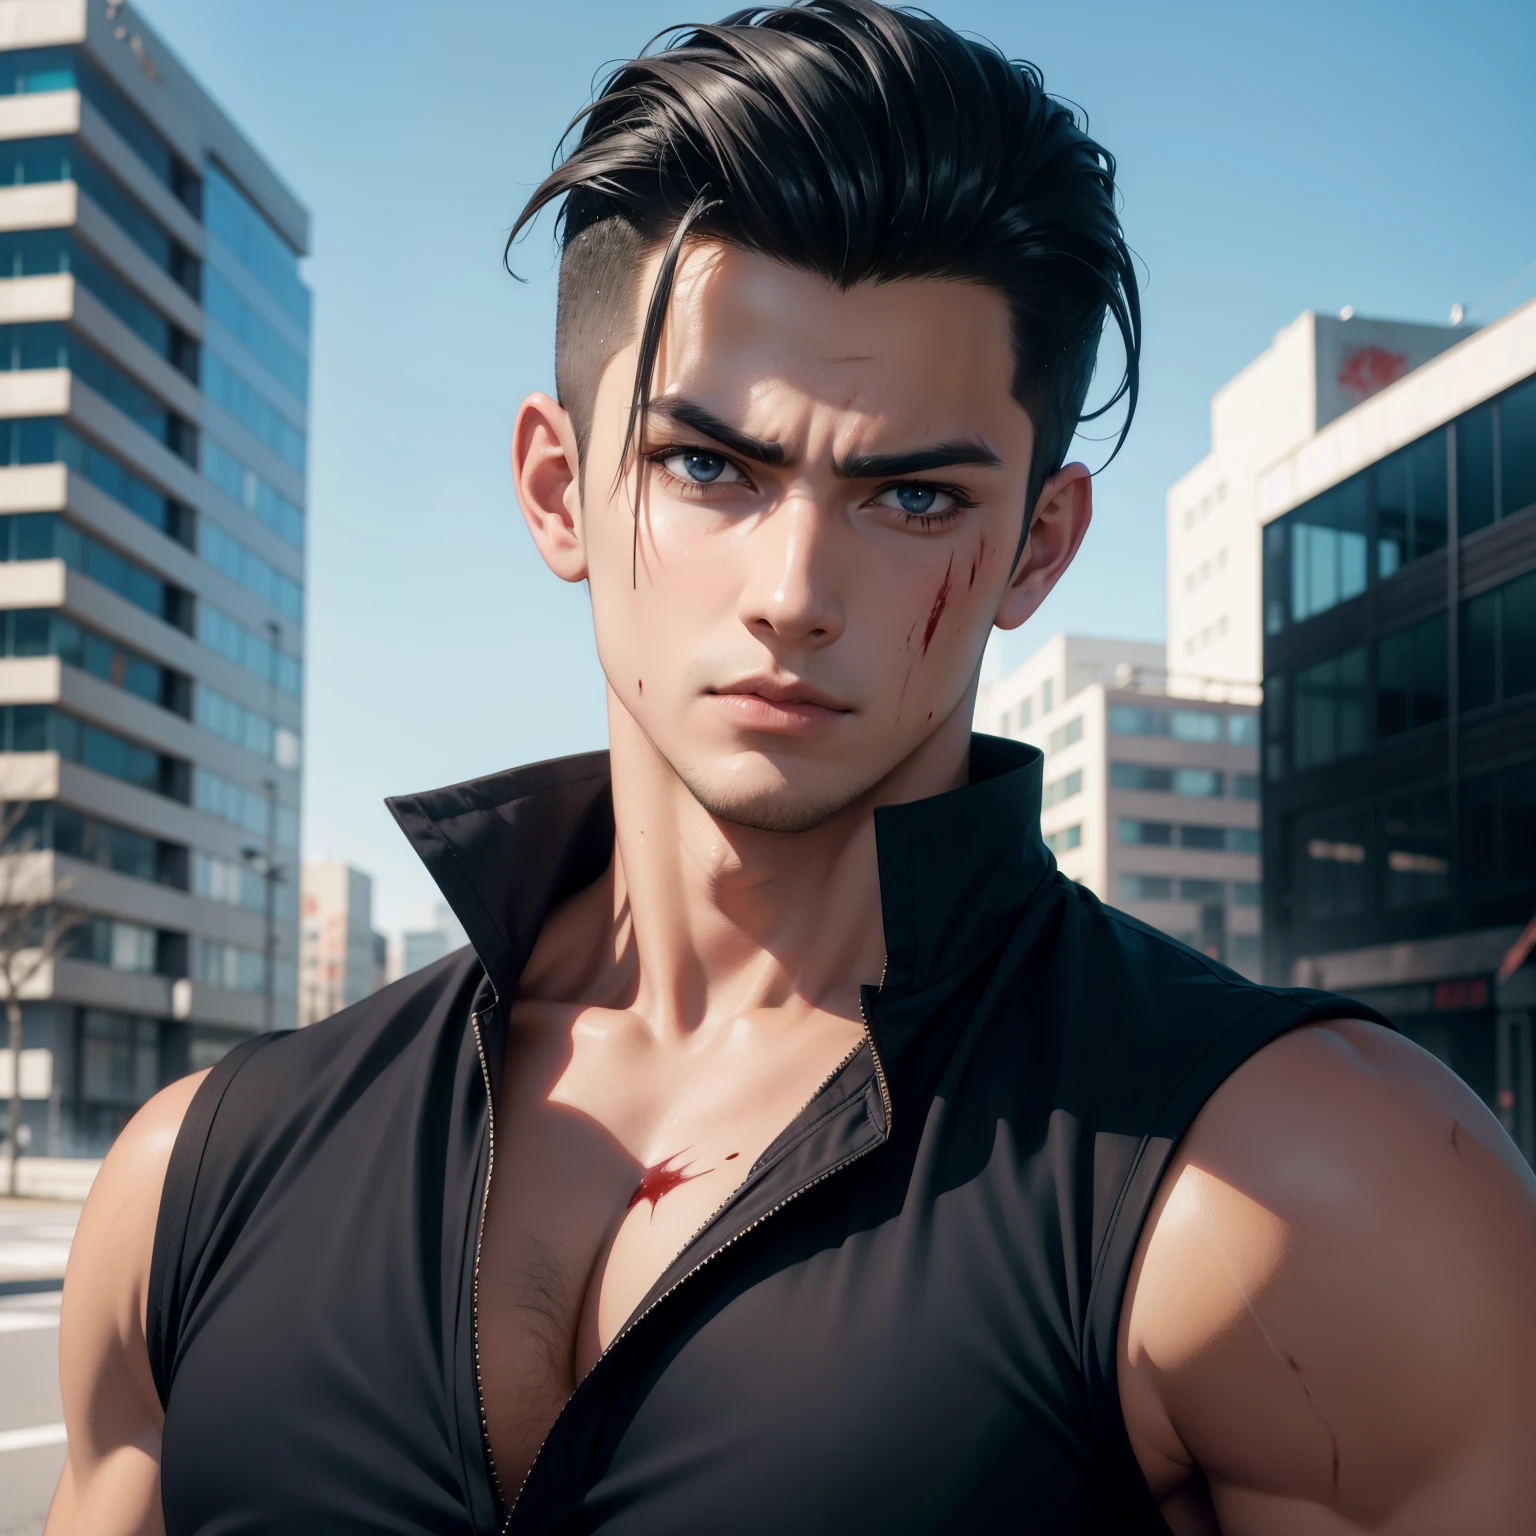 Realistic Anime style, Handsome boy, cool boy, serious face, torn Black shirt, Slicked Back hairstyle, Several blood wounds on his face, Background of destroyed buildings